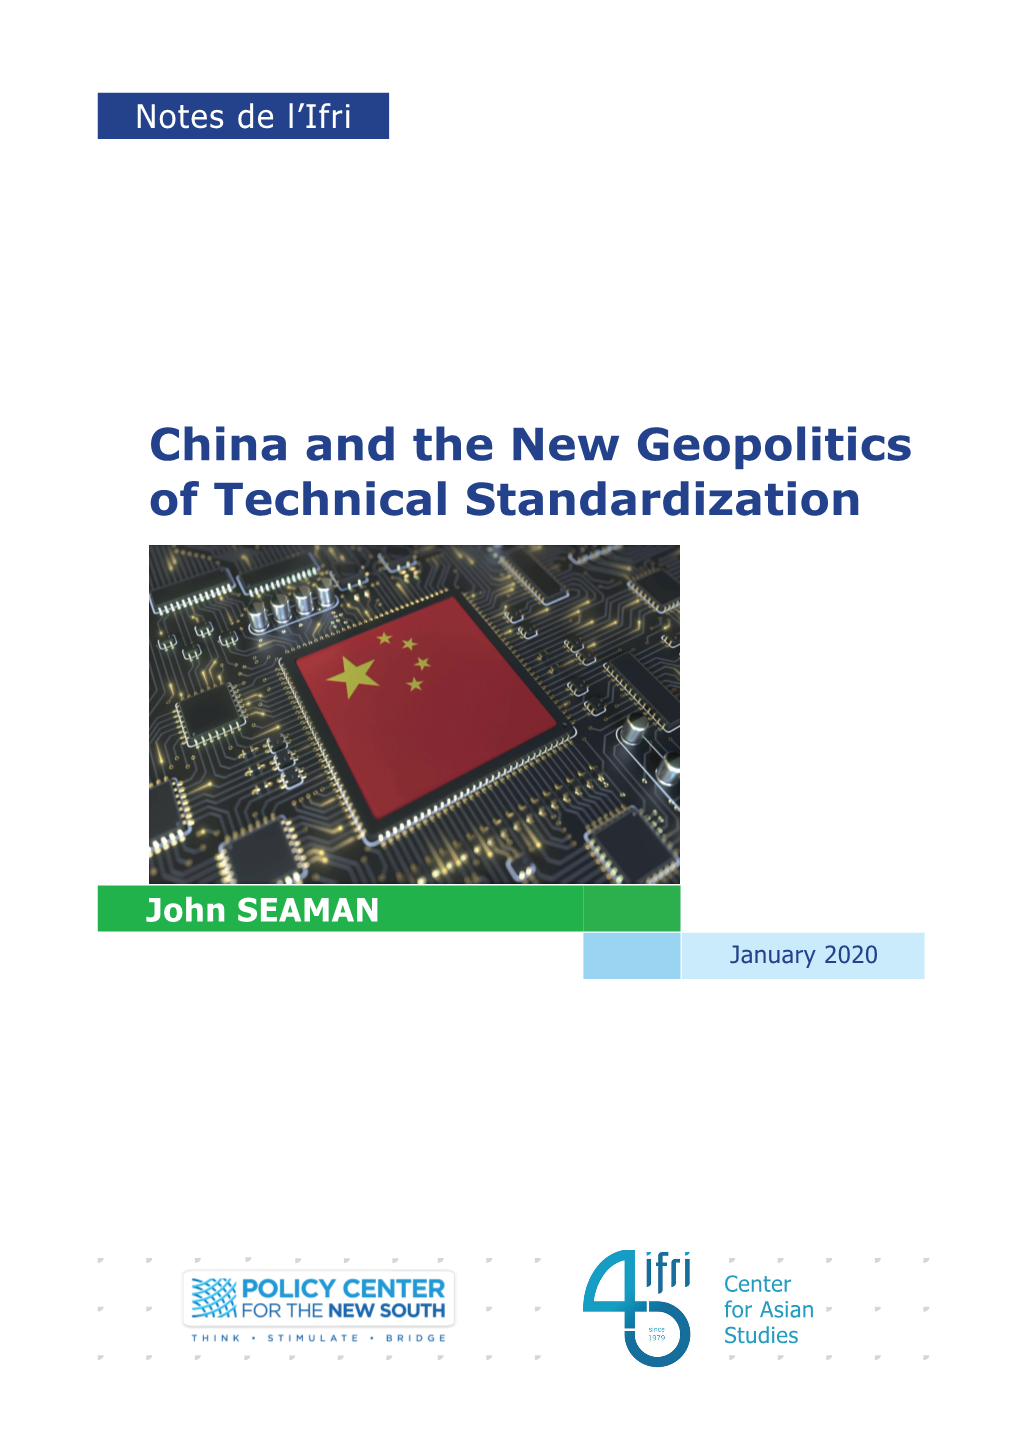 China and the New Geopolitics of Technical Standardization